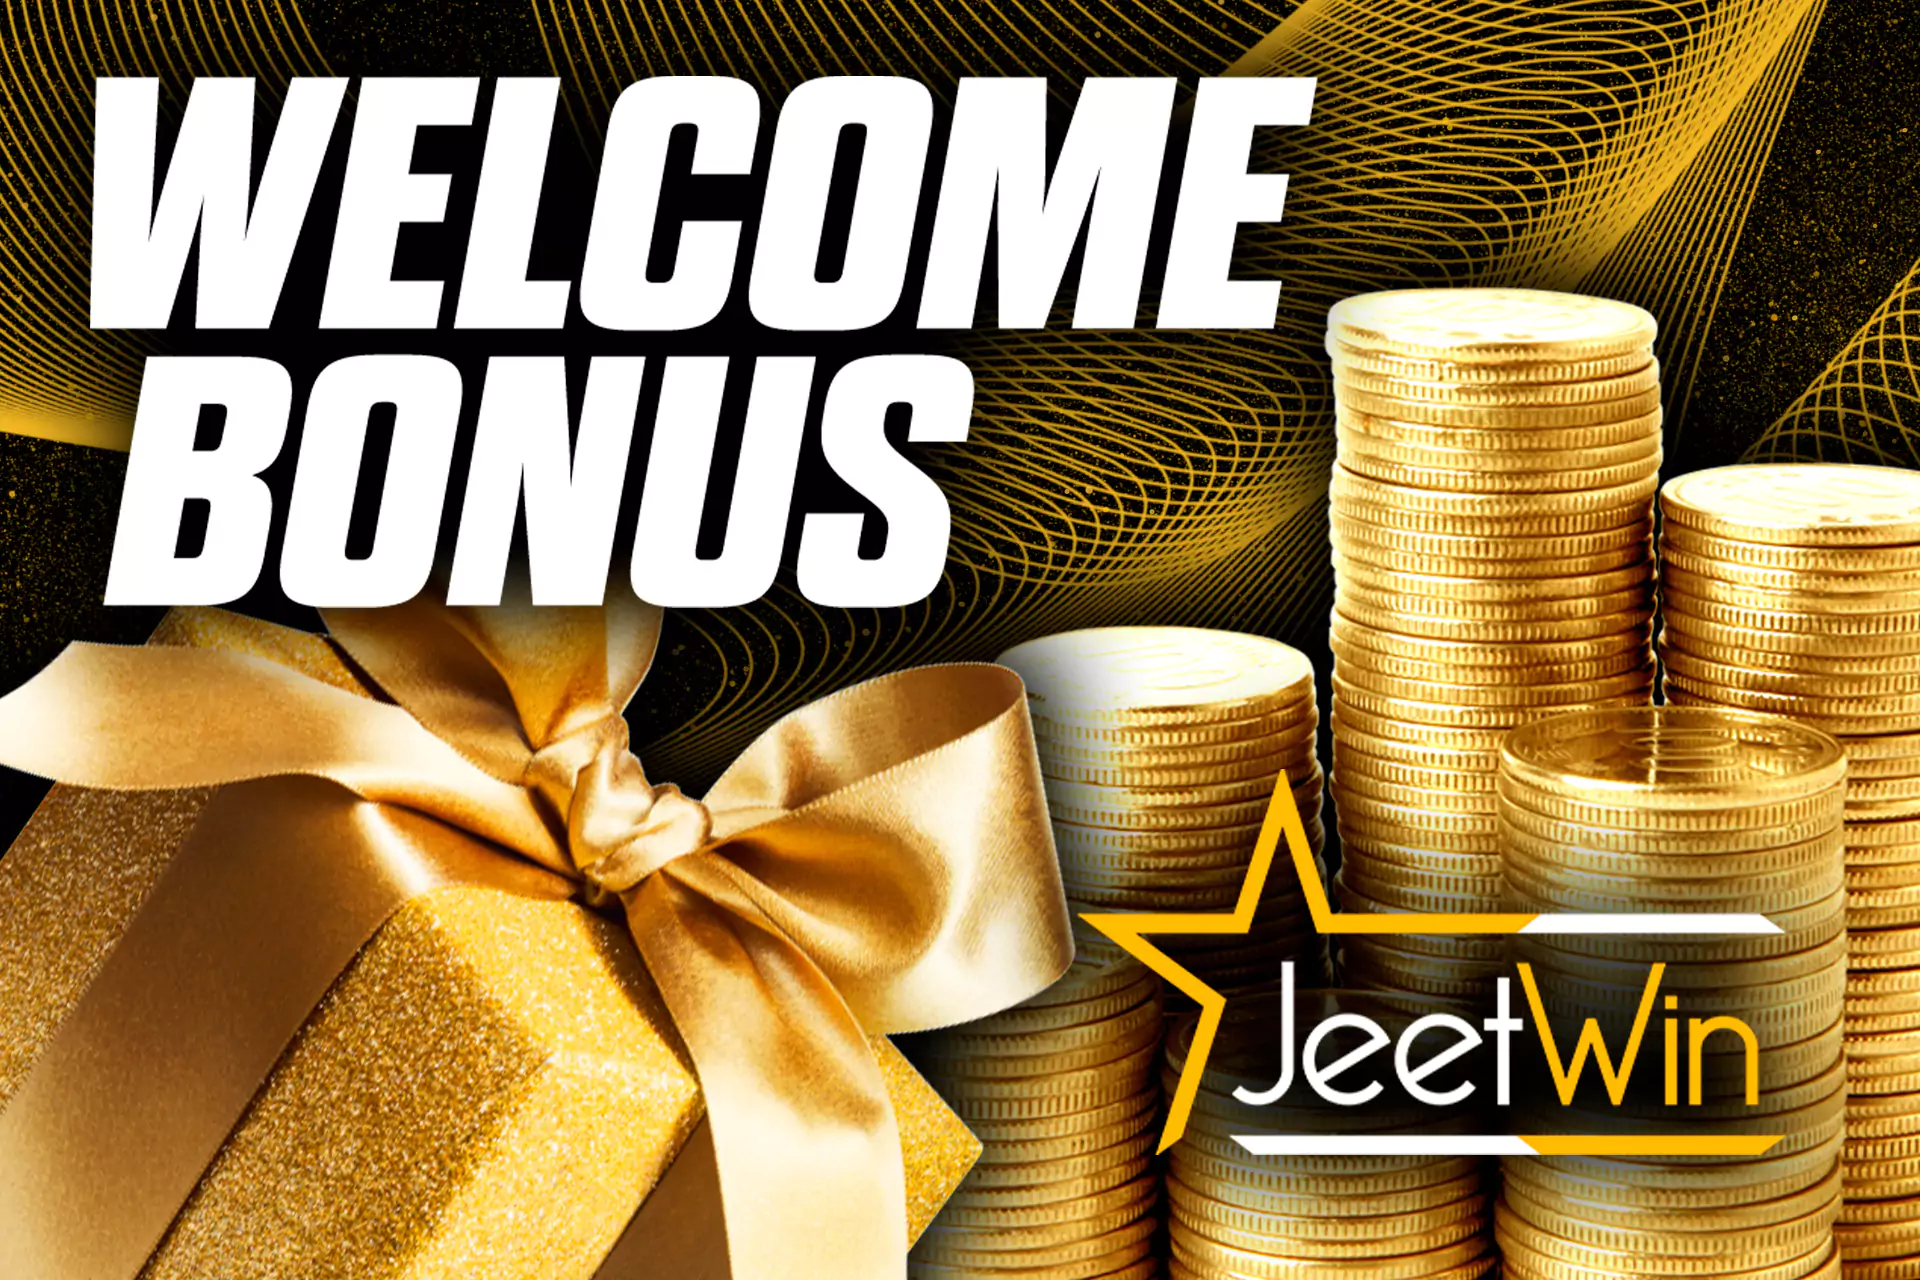 Jeetwin gives new users an immediate sign-up bonus and a welcome bonus after their first deposit.